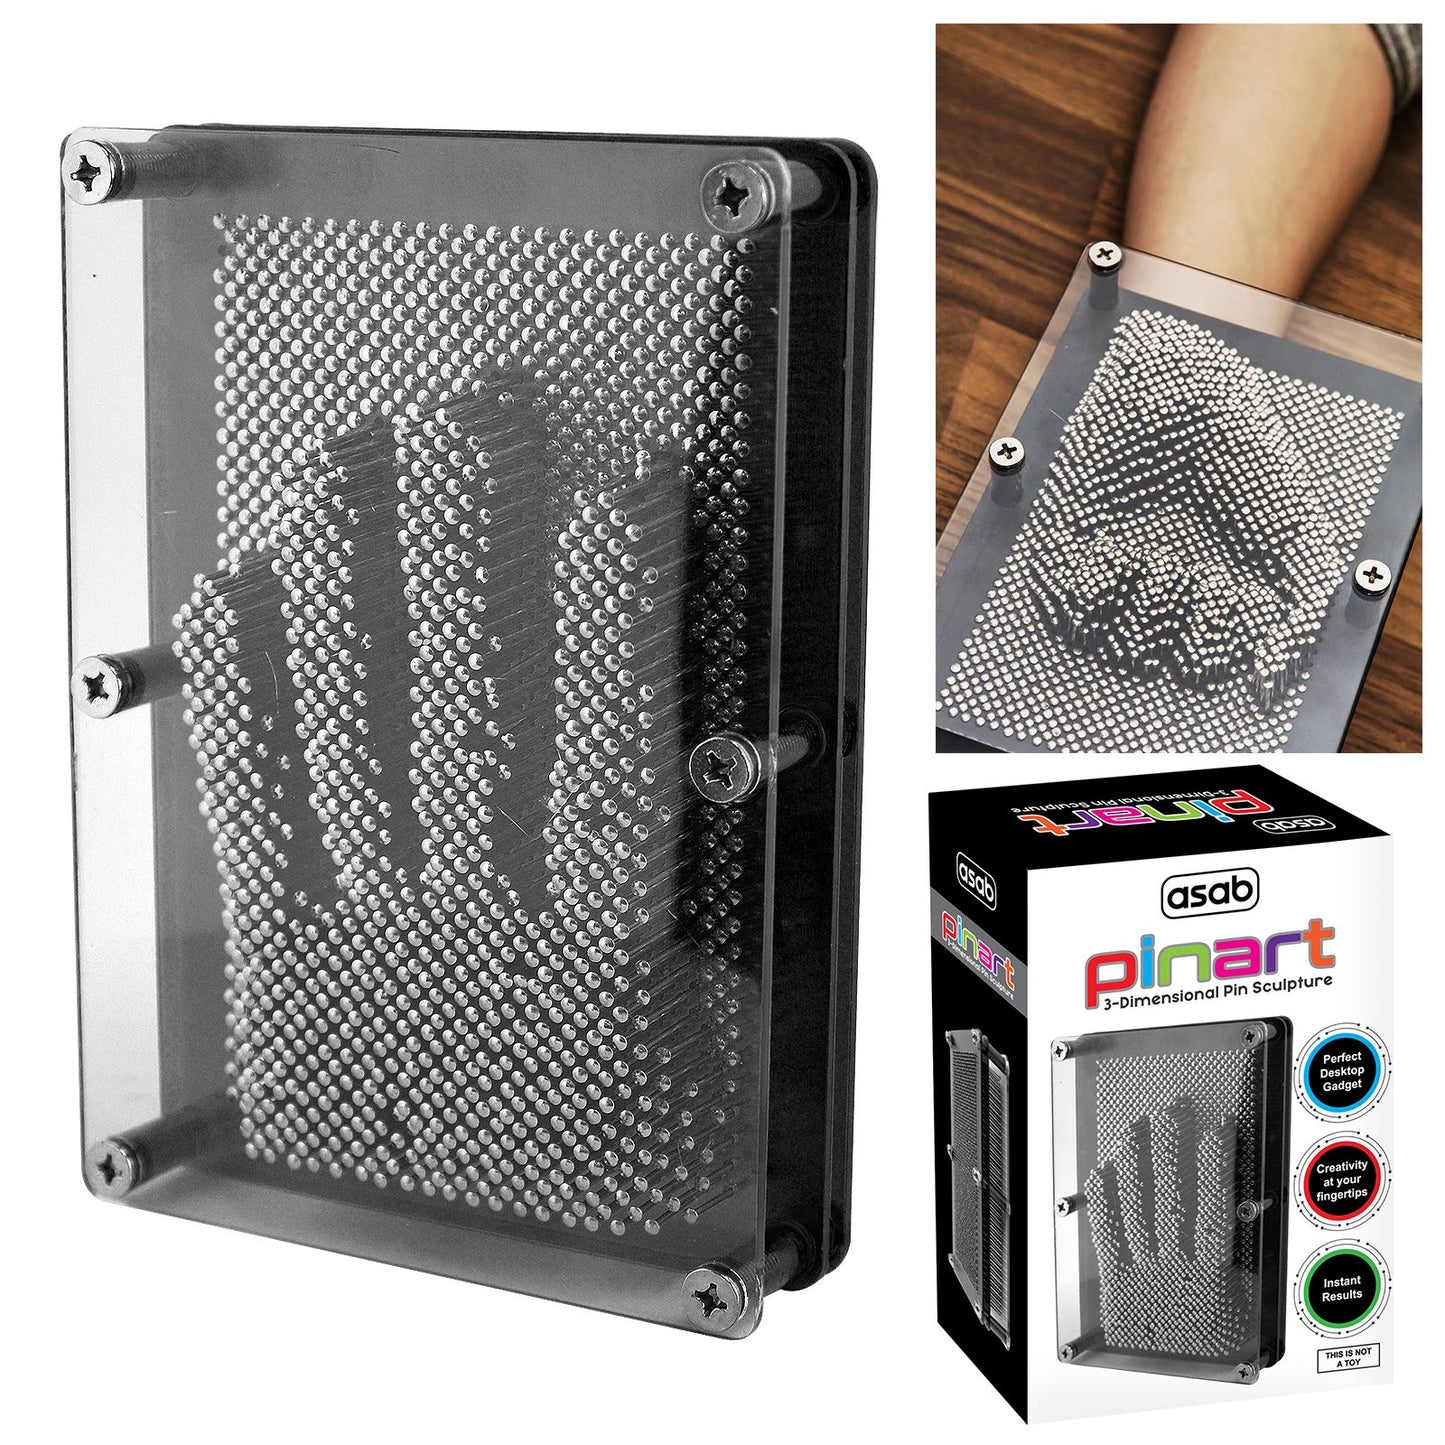 Fun and Interactive 3D Metal Pin Art Gadget for Kids and Adults